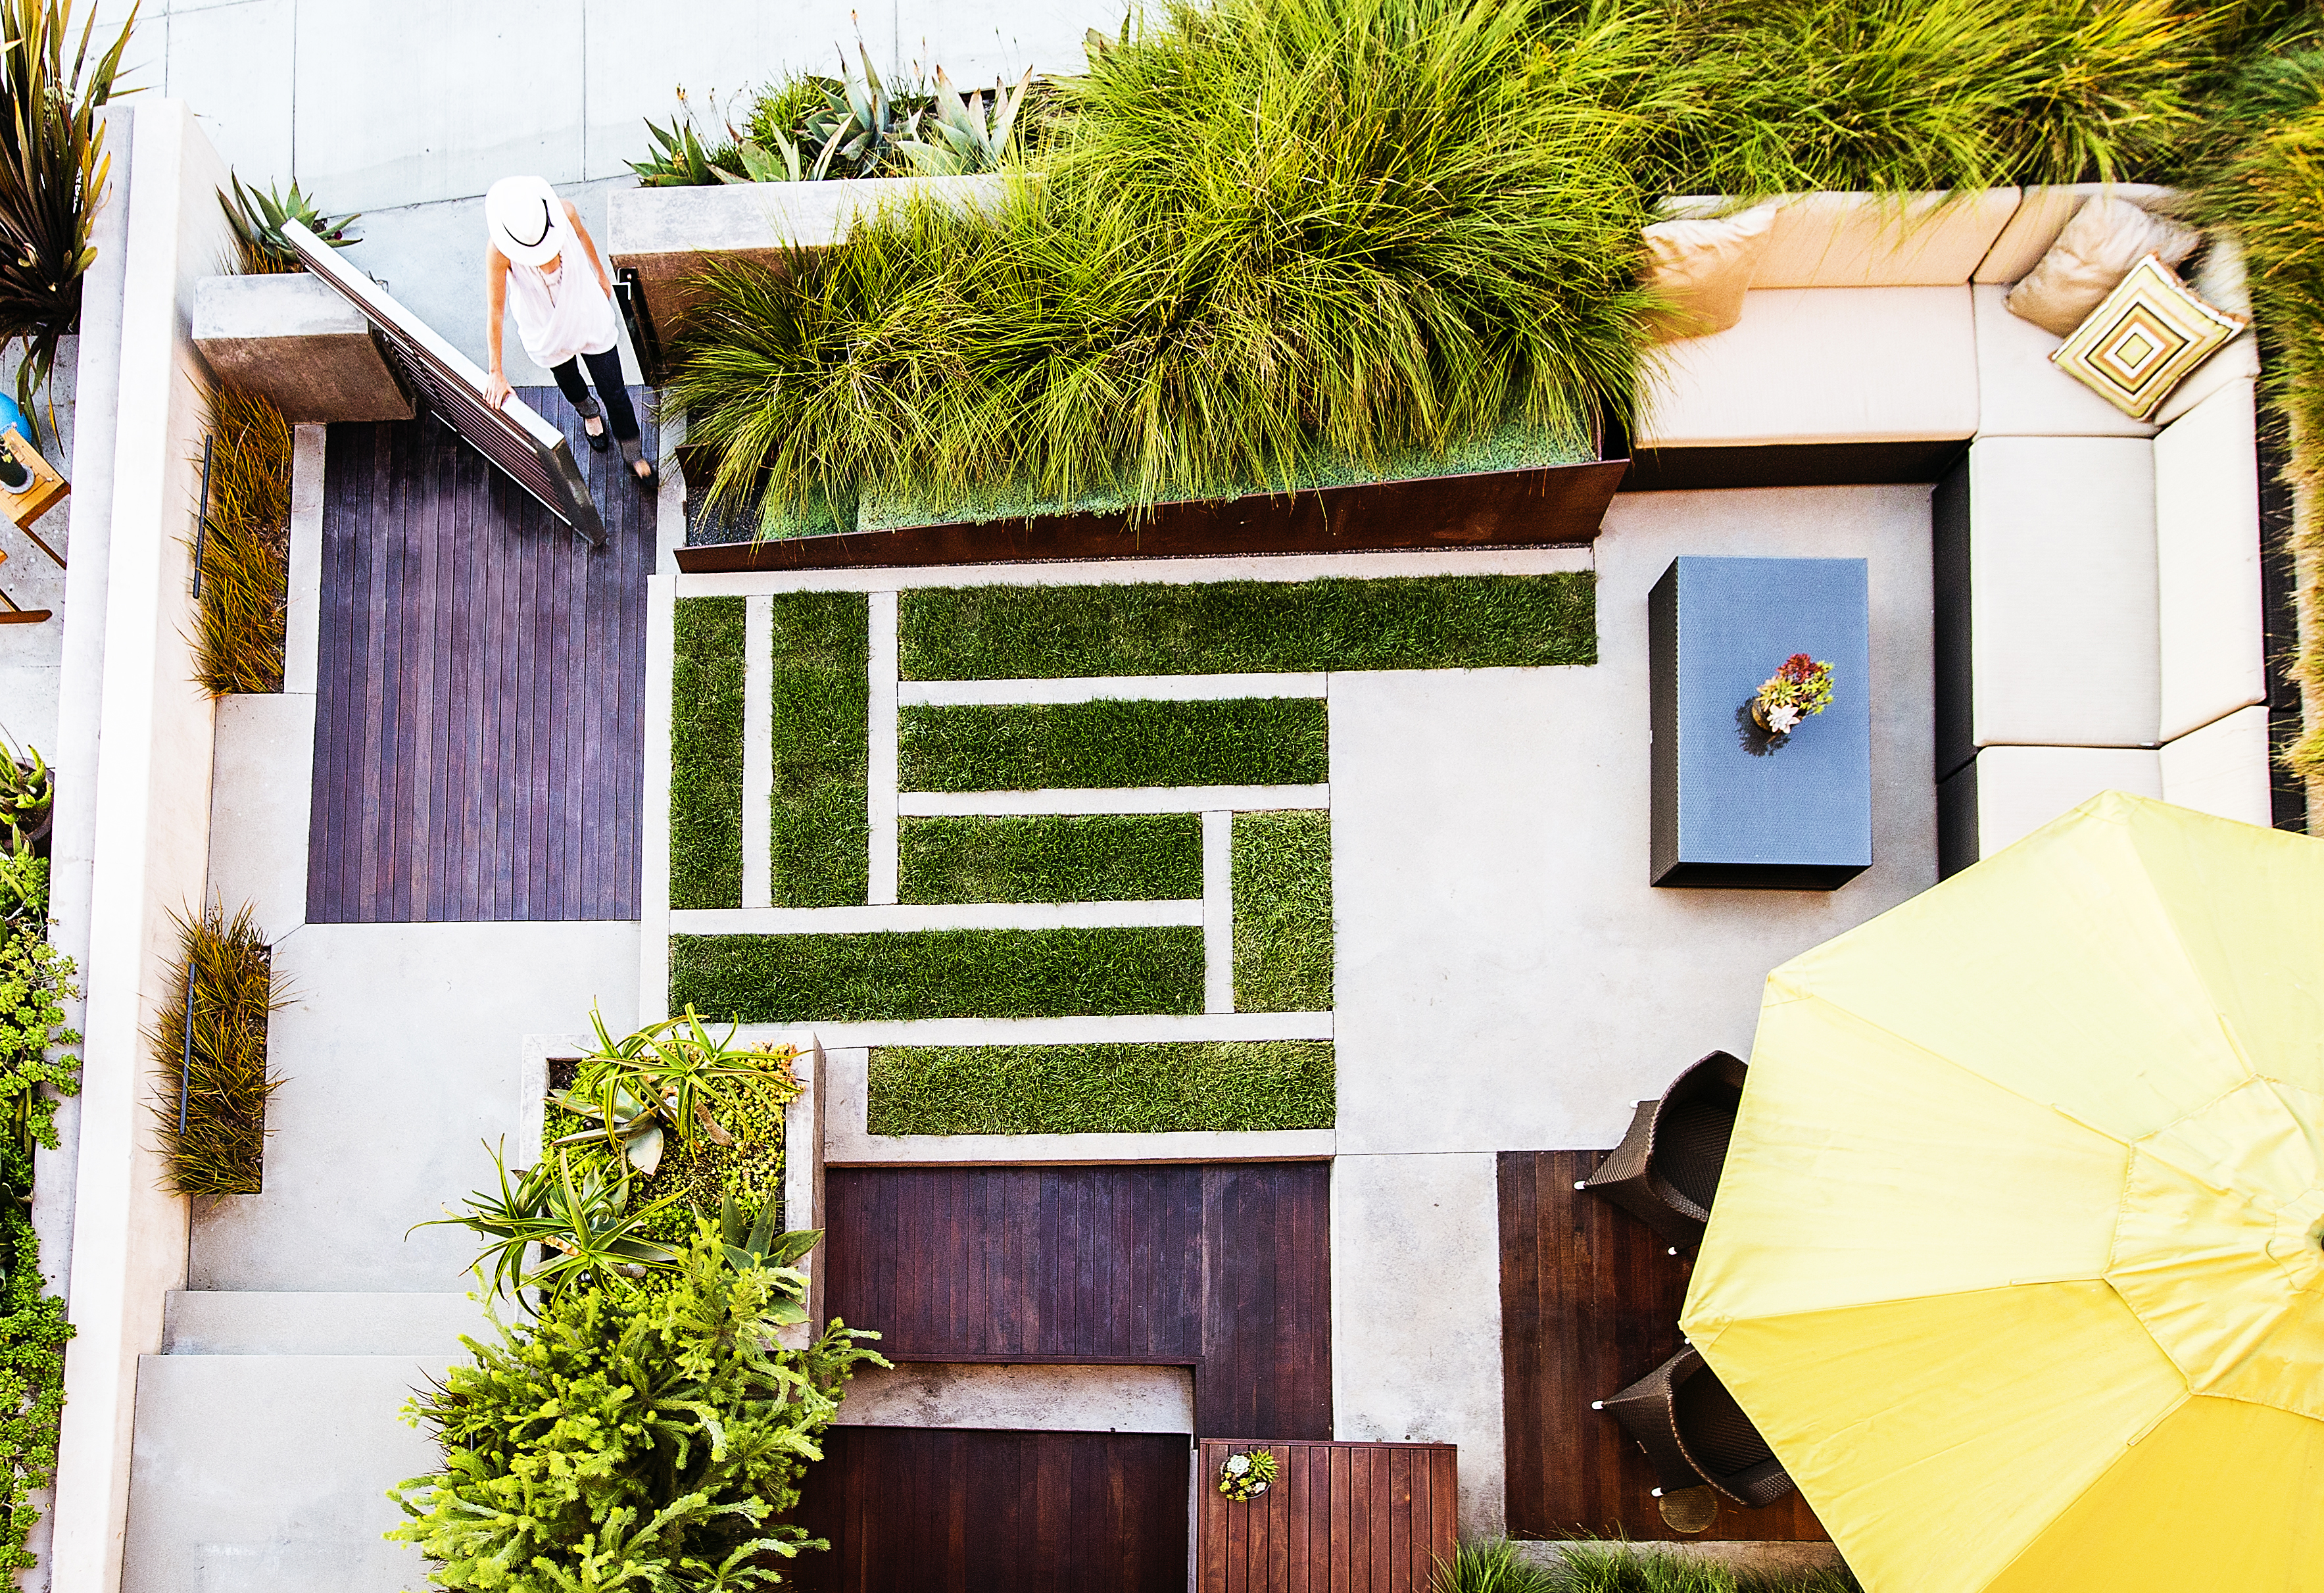 How to Design a Yard from Above